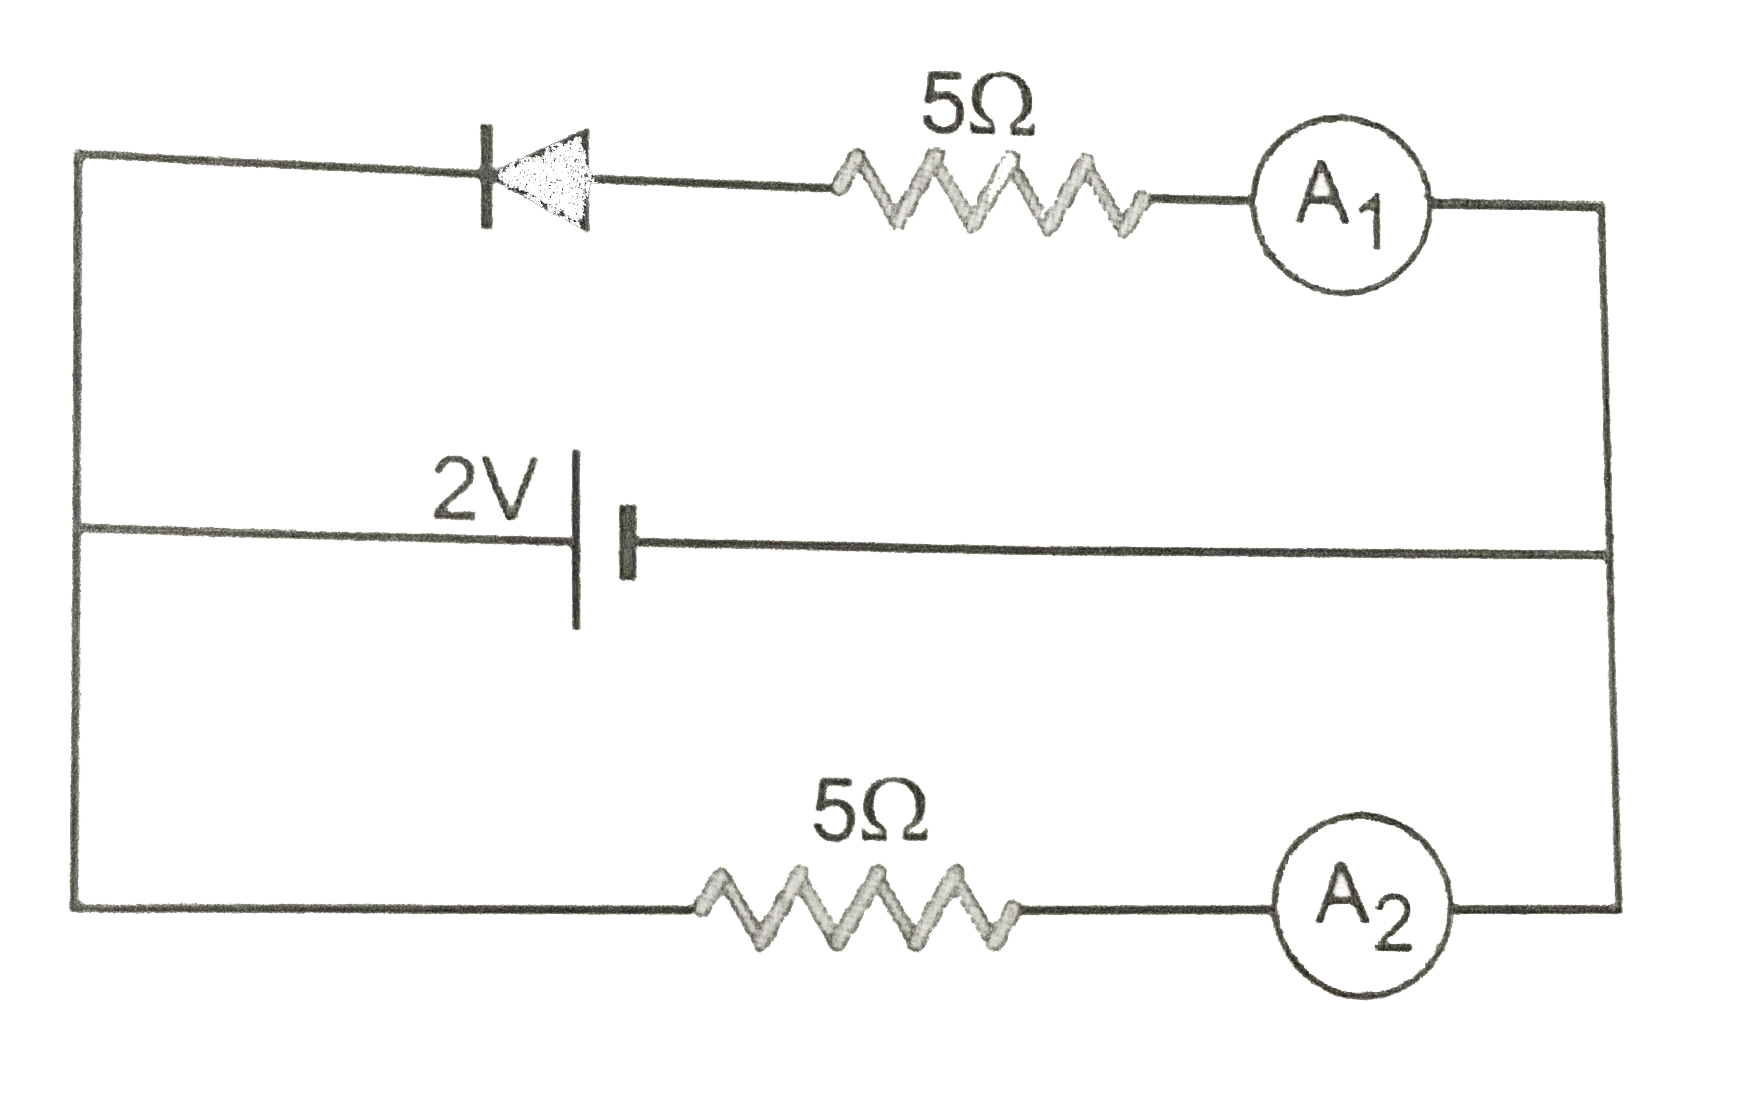 What are the reading of ammeters A(1) and A(2) shown in Fig.? Neglect the resistances of the ammeters, when the p-n junction used is ideal one.